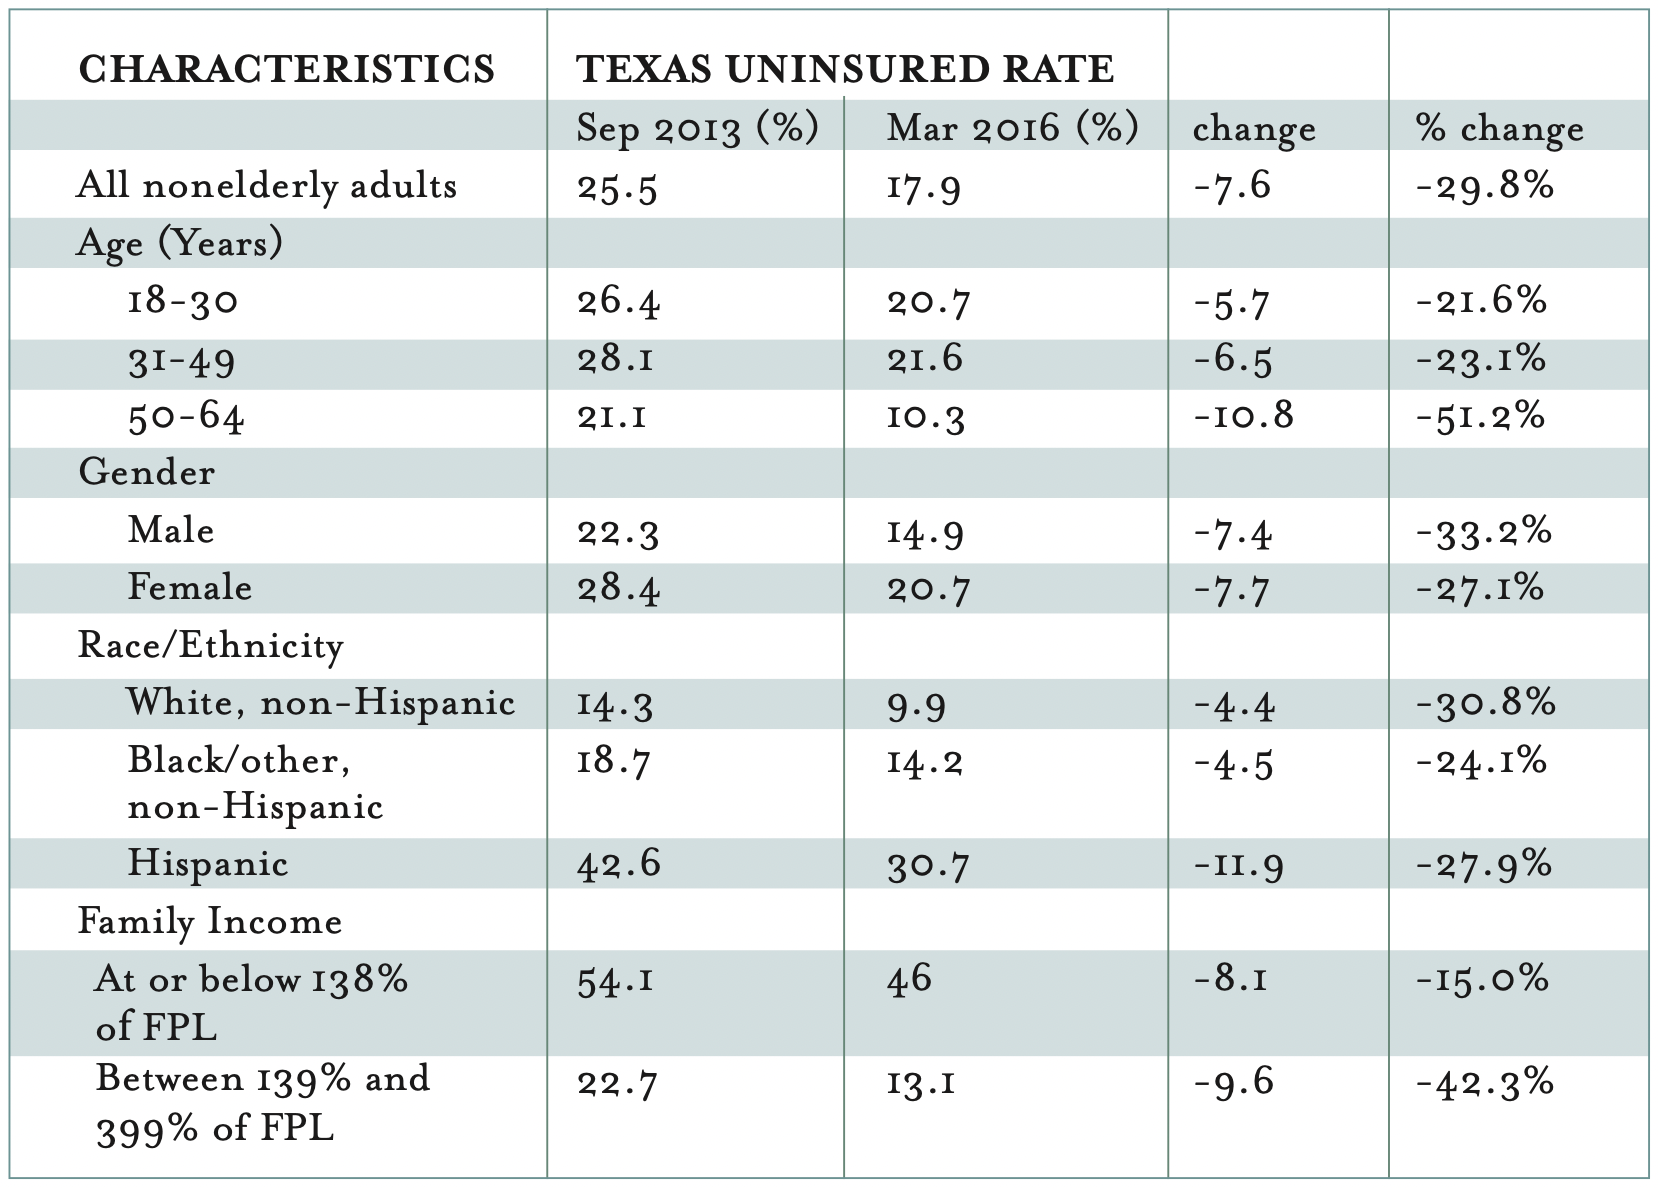 This table compares uninsured rates by demographics for Texas adults.